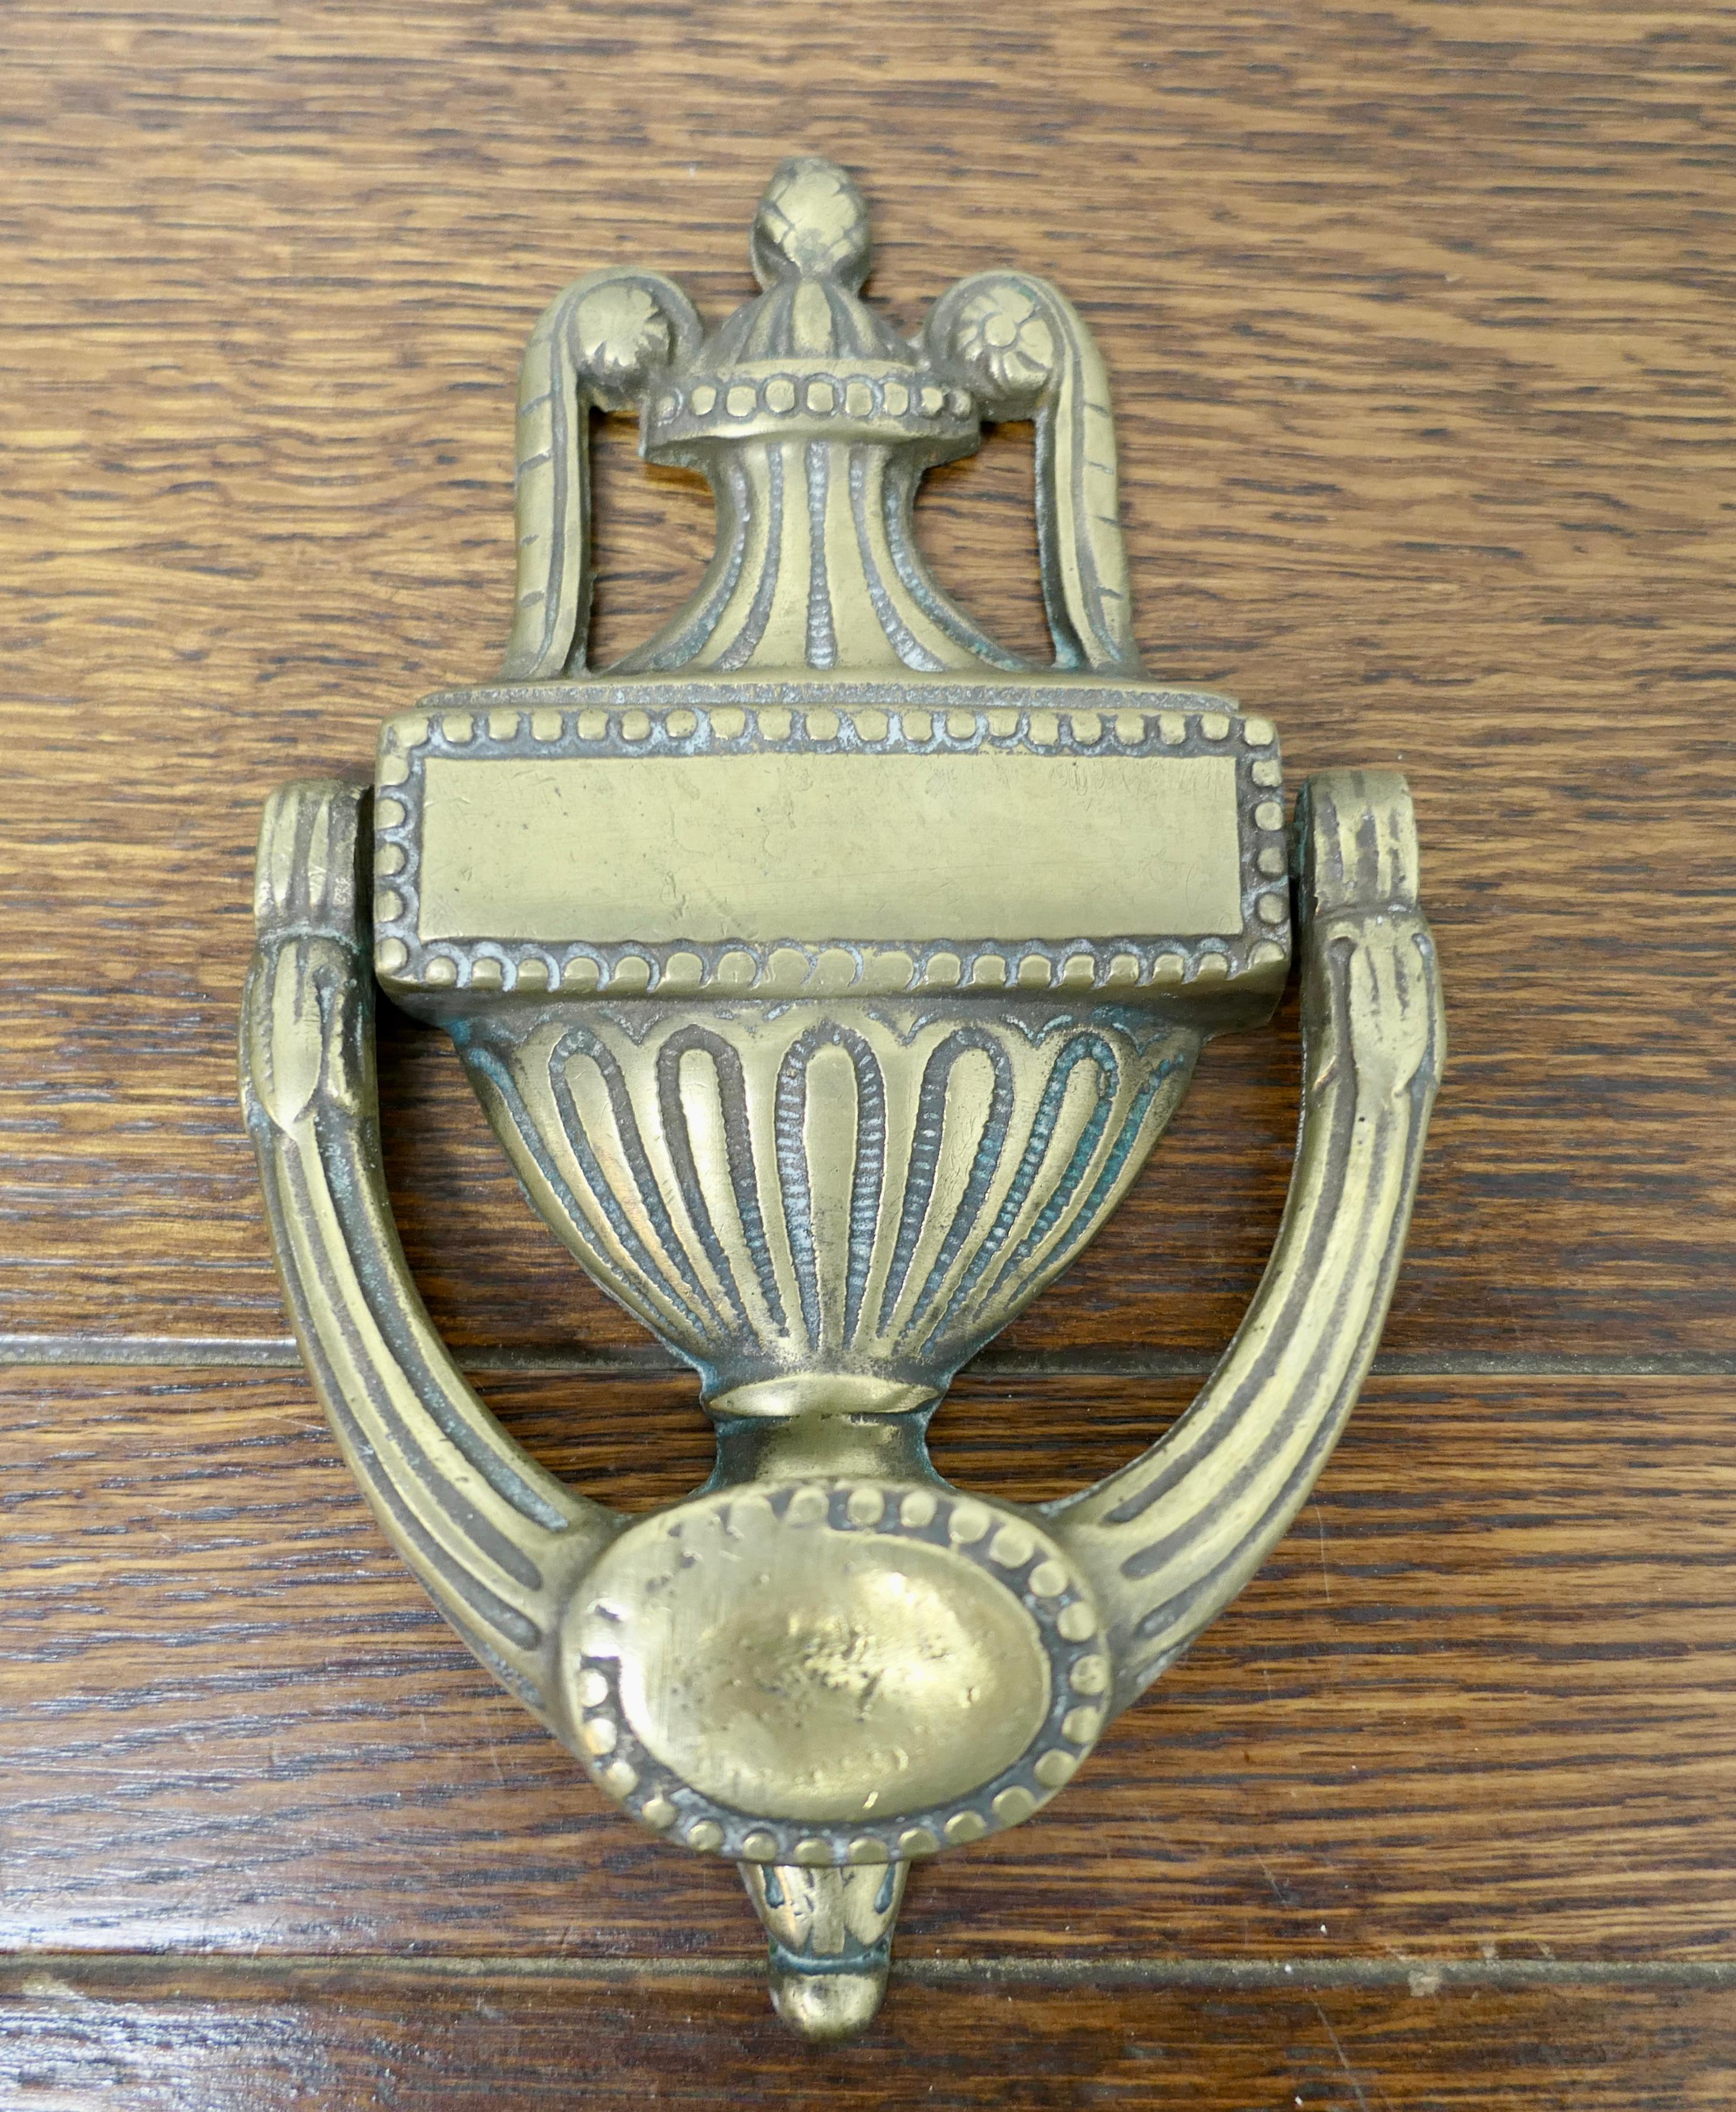 19th century Adams style brass urn and cover door knocker,

A large Victorian brass door knocker decorated with a classic Urn and cover, this a one piece Knocker
The door knocker measures 8” high x 5” wide and 1.5” deep
WD122.